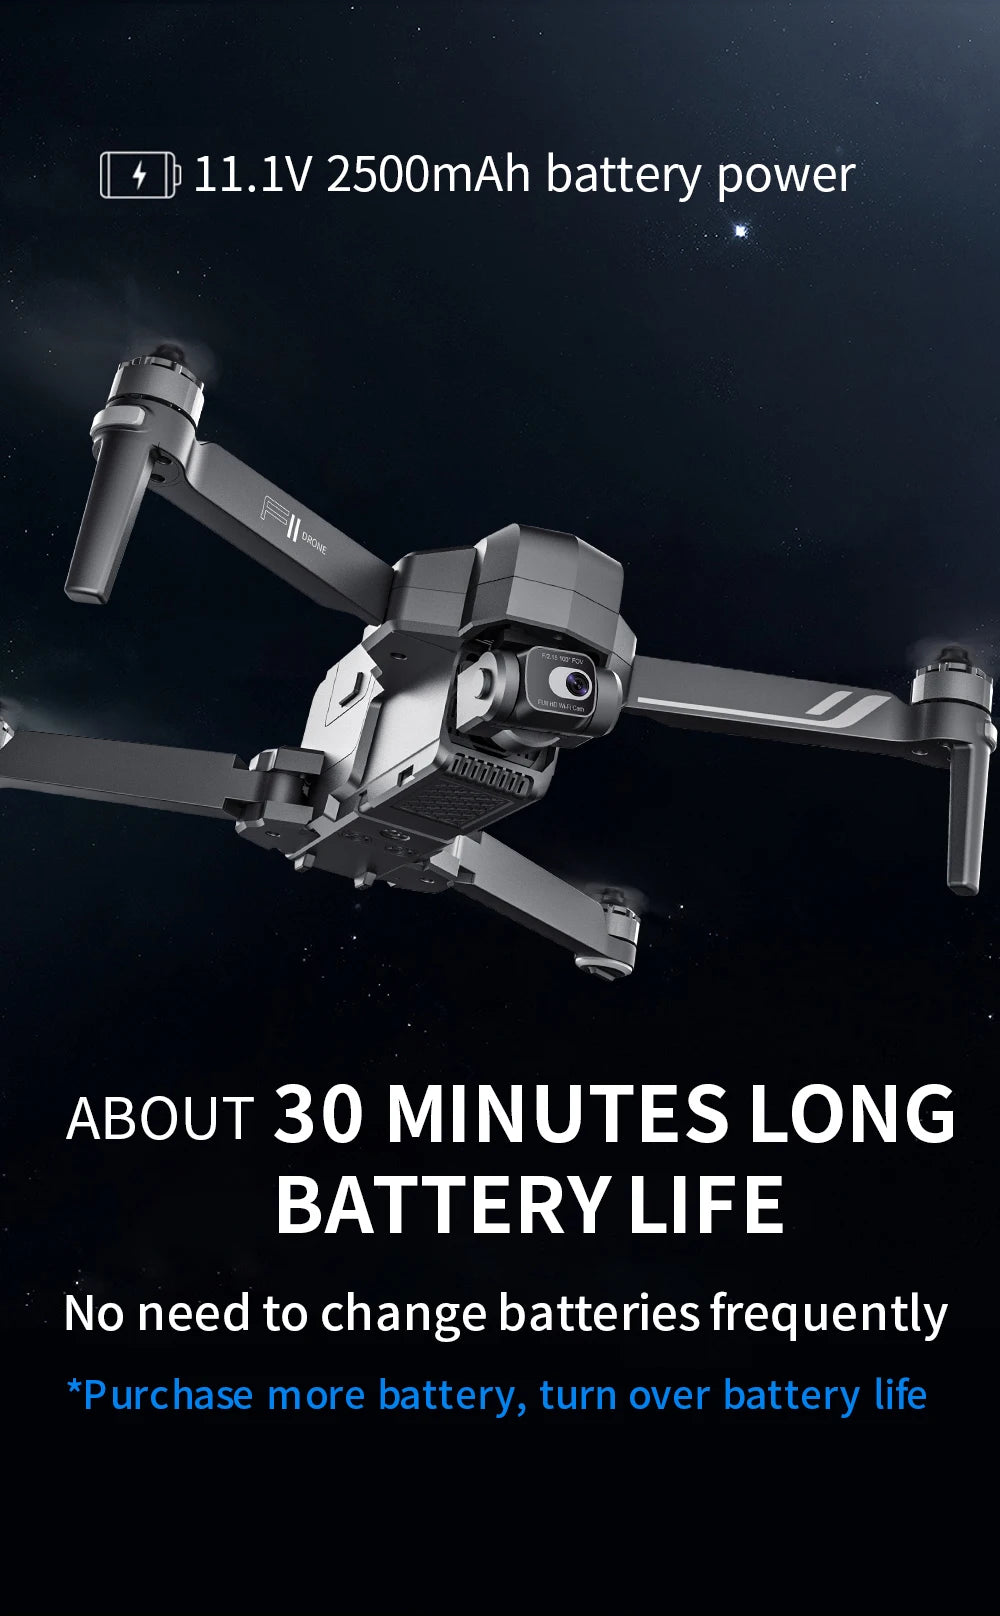 SJRC F11 / F11S  Pro Drone, 11.1V 2500mAh battery power ABOUT 30 MINUTES LONG B